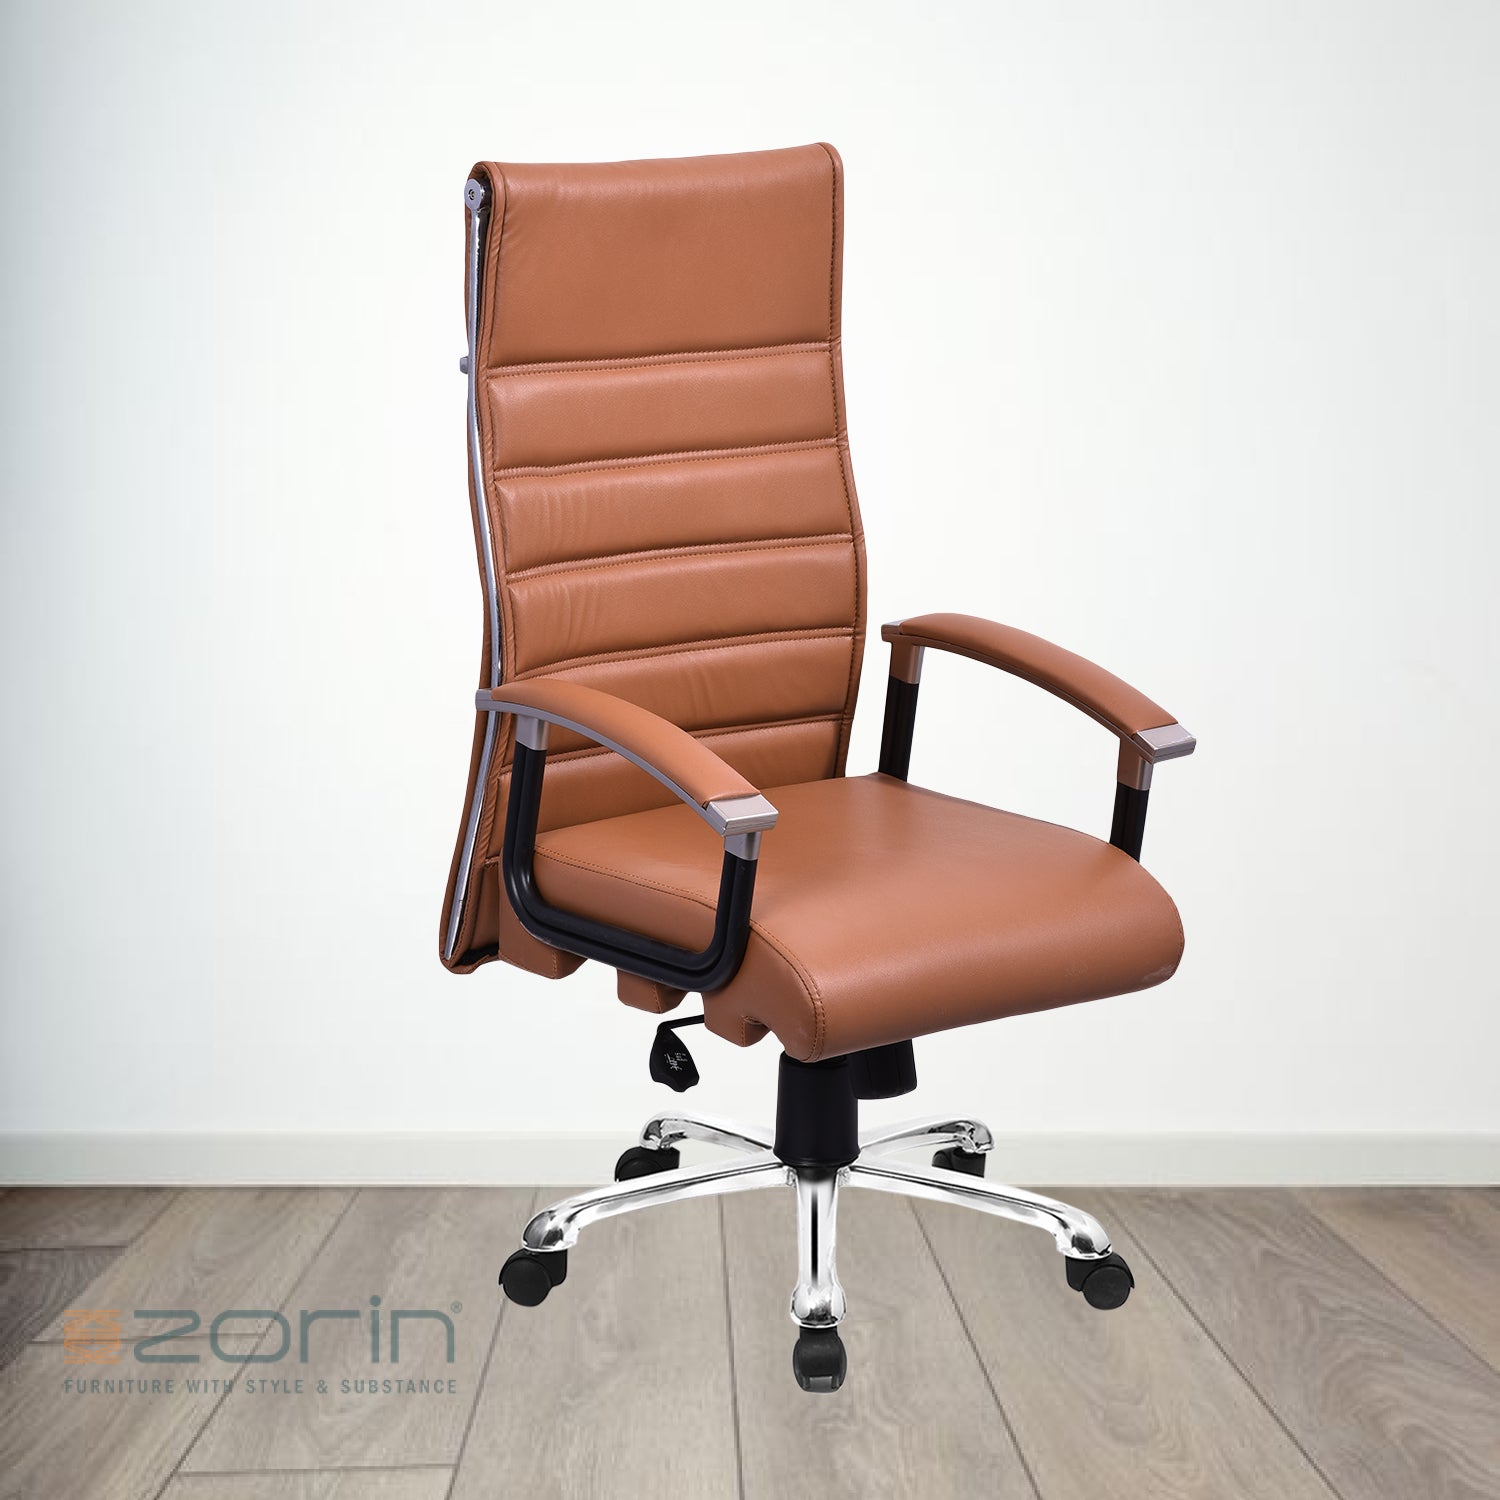 ZSE1034 High Back Chair by Zorin in Tan Color Zorin